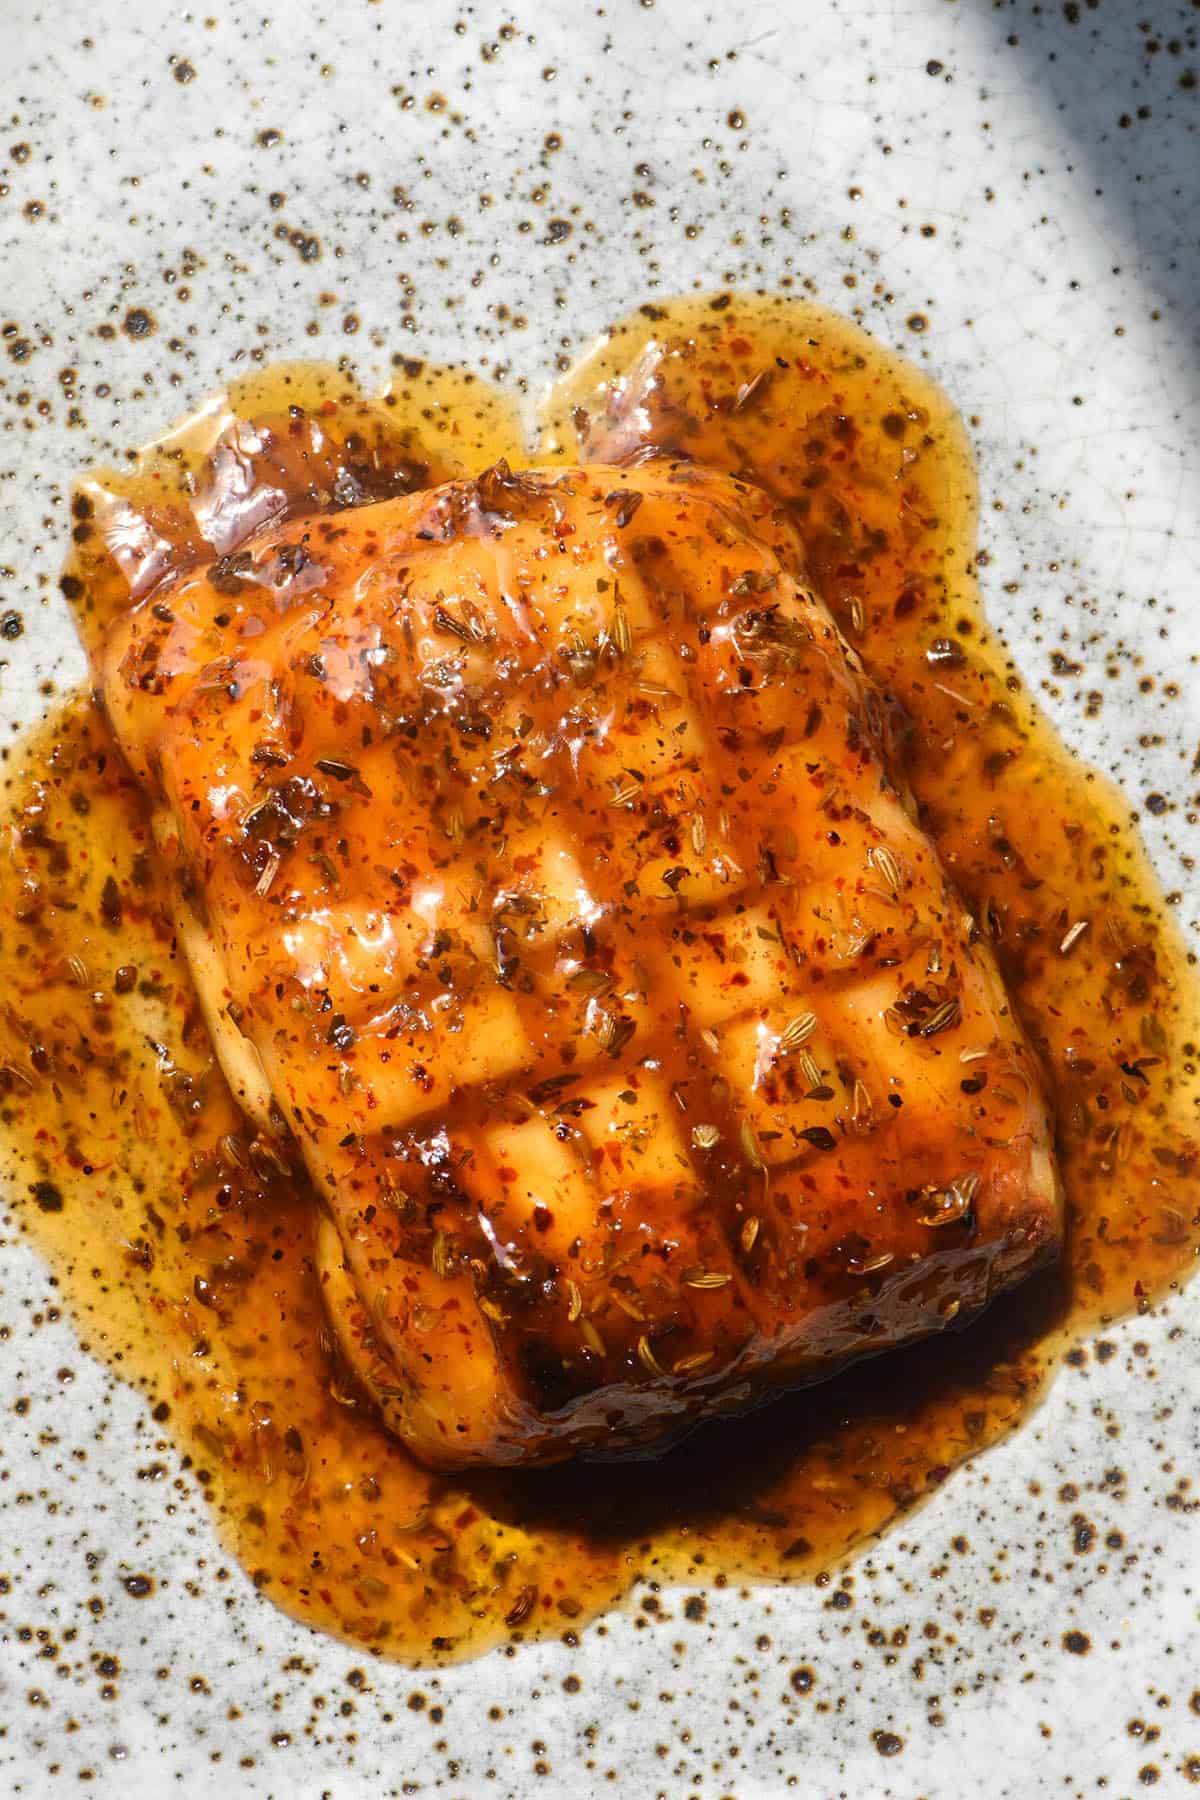 An aerial sunlit image of a slab of baked halloumi that has been scored and smothered in a maple and lemon glaze. The glaze is a deep red and is dotted with fennel seeds, dried oregano and chilli flakes. The halloumi sits atop a white speckled ceramic plate. 